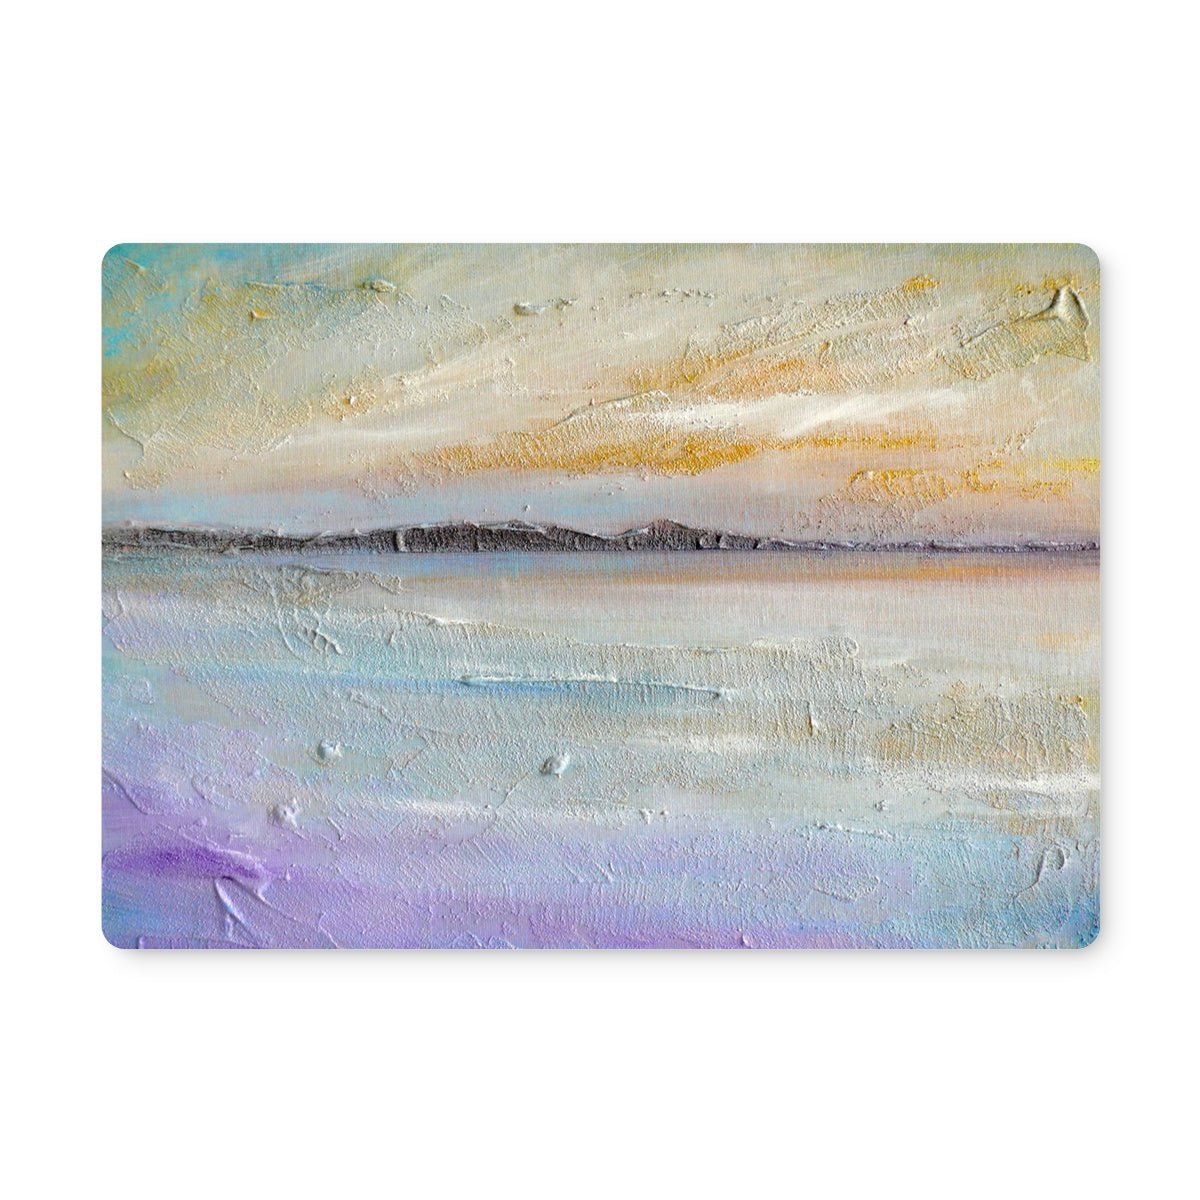 Sollas Beach South Uist Art Gifts Placemat-Placemats-Hebridean Islands Art Gallery-6 Placemats-Paintings, Prints, Homeware, Art Gifts From Scotland By Scottish Artist Kevin Hunter